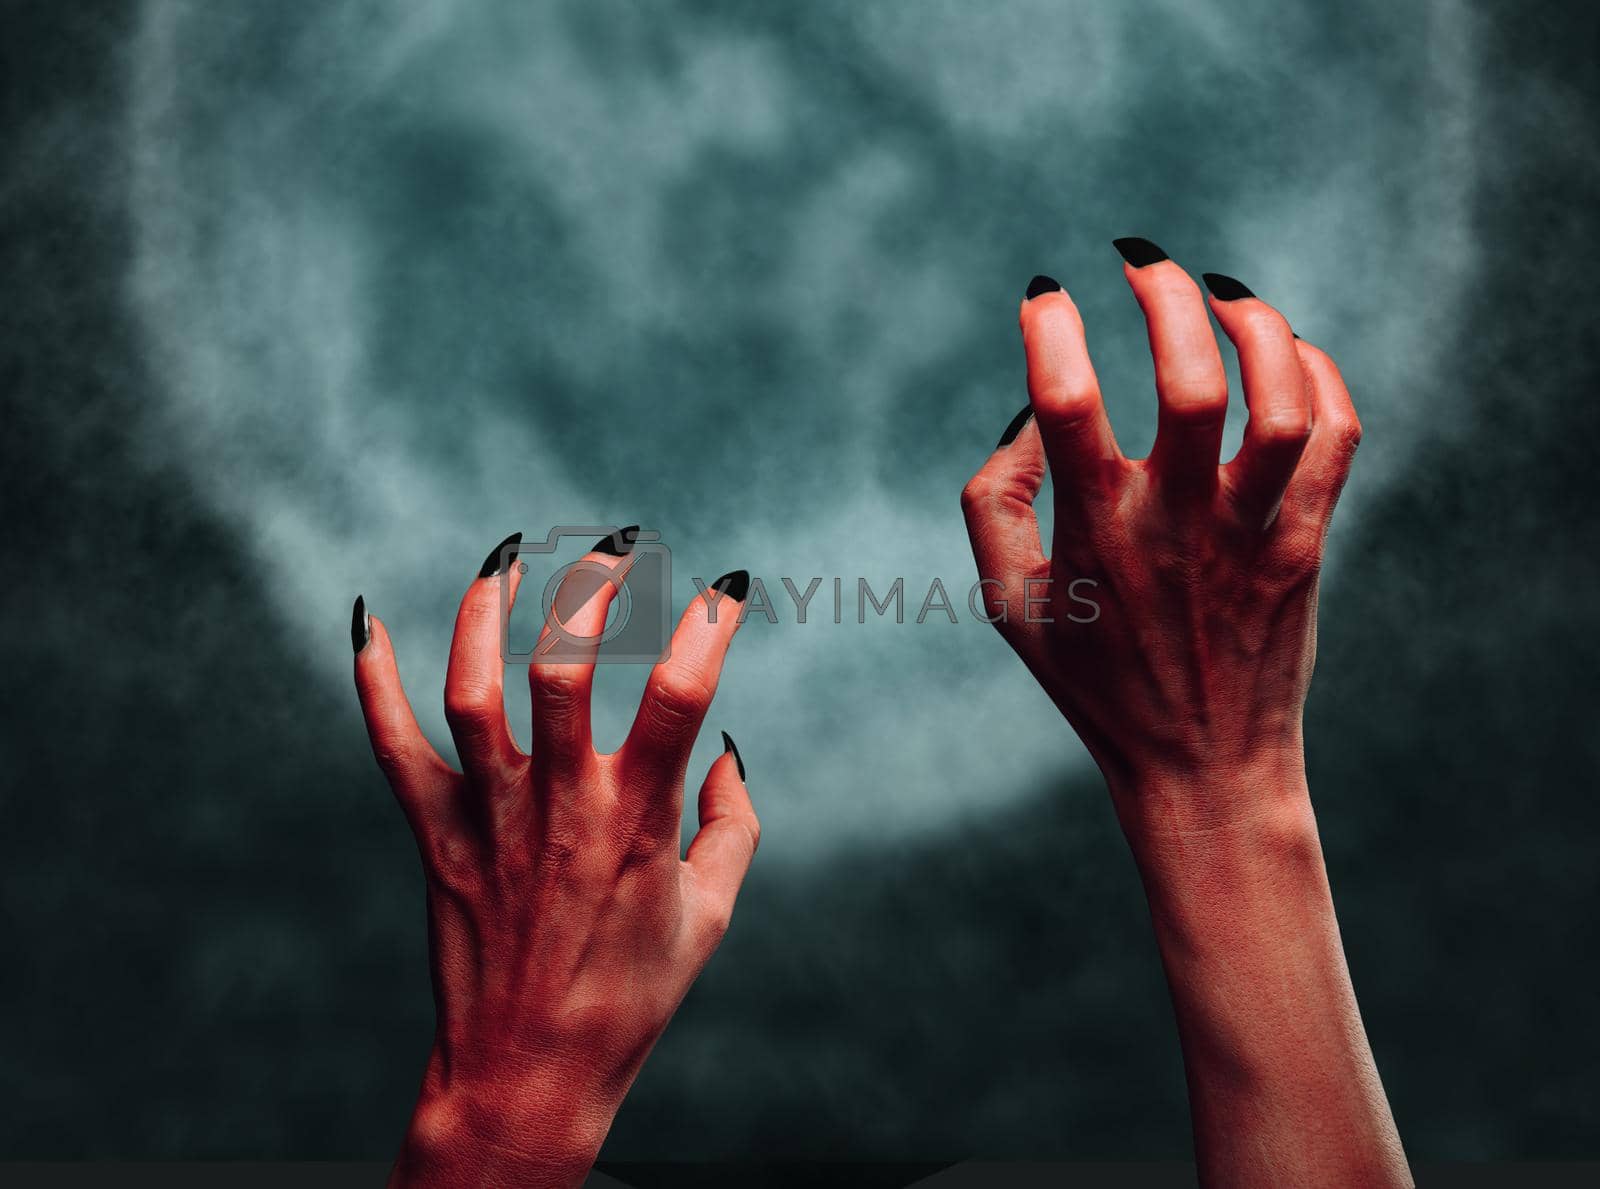 Royalty free image of Hands of the demon at midnight by alexAleksei